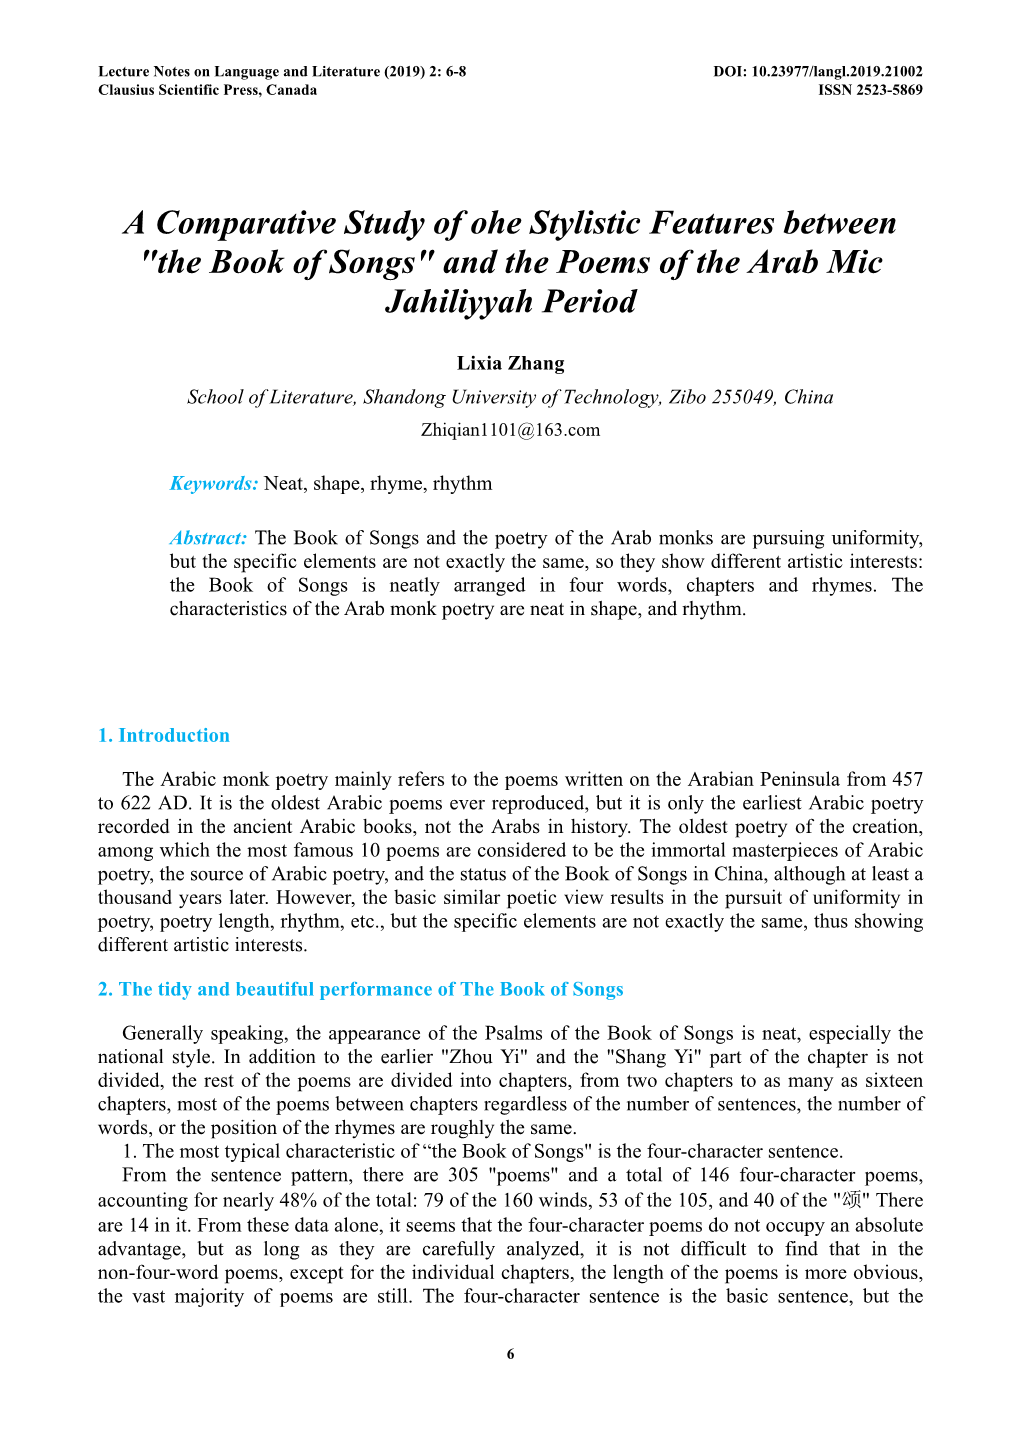 "The Book of Songs" and the Poems of the Arab Mic Jahiliyyah Period